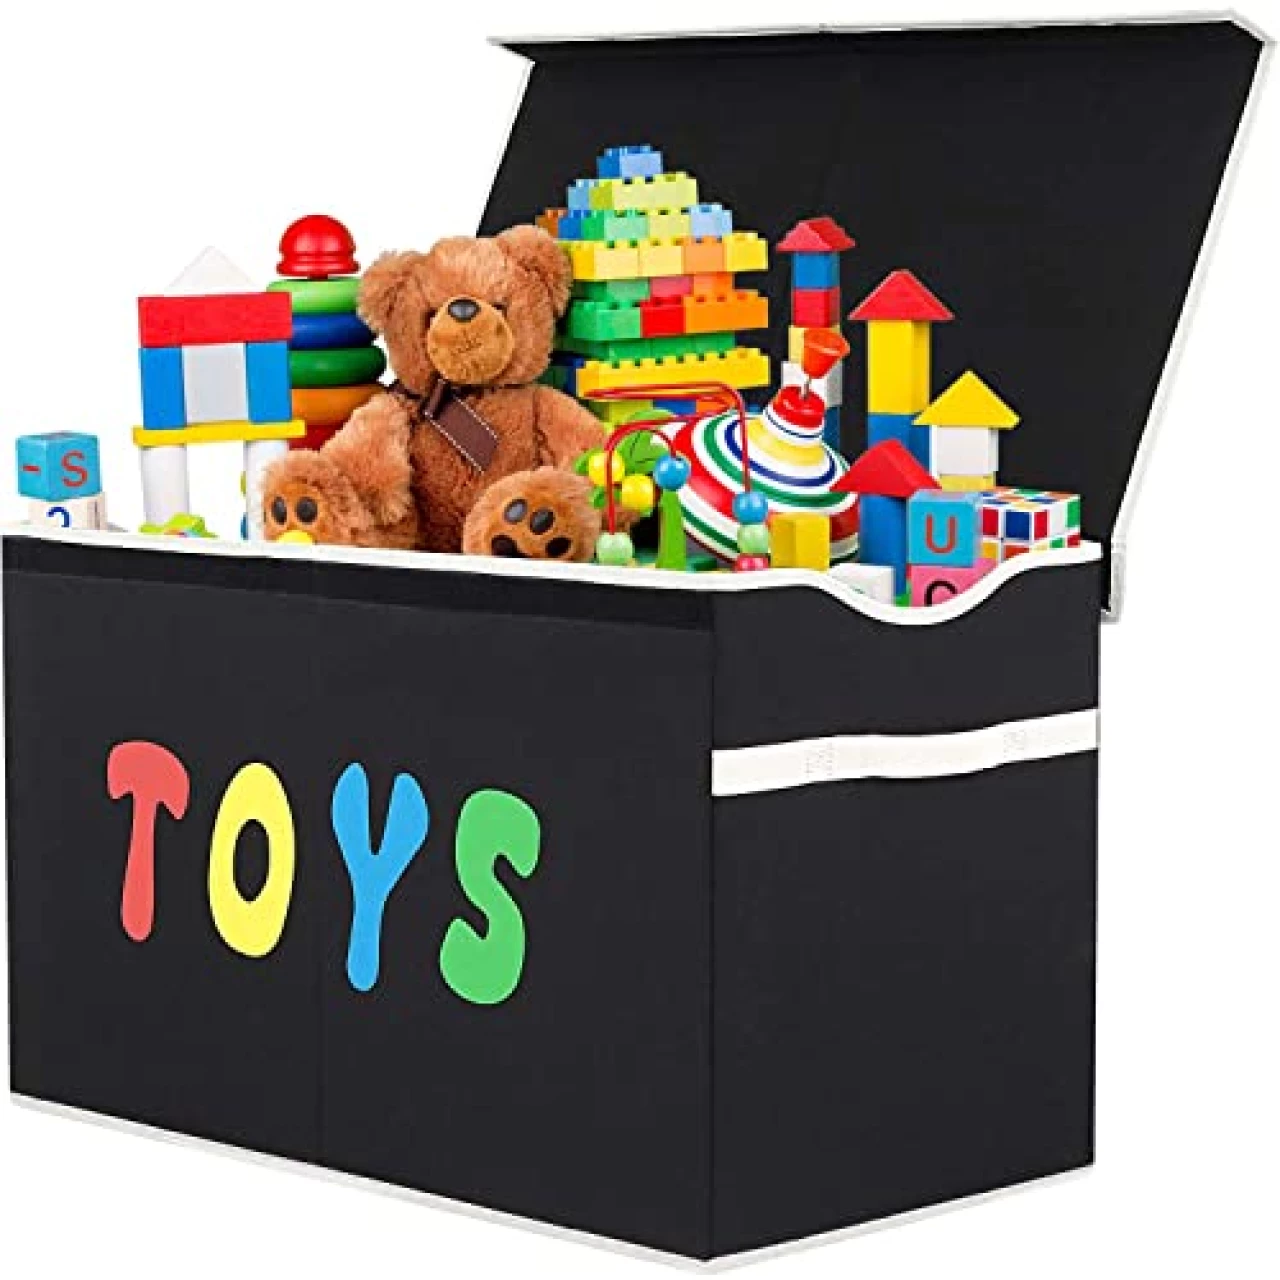 YOLOXO Toy Box Chest, Collapsible Sturdy Storage Bins with Lids, Extra Large Kids Toy Storage Organizer Boxes Bins Baskets for Kids, Boys, Girls, Nursery Room, Playroom, Closet (BLACK)